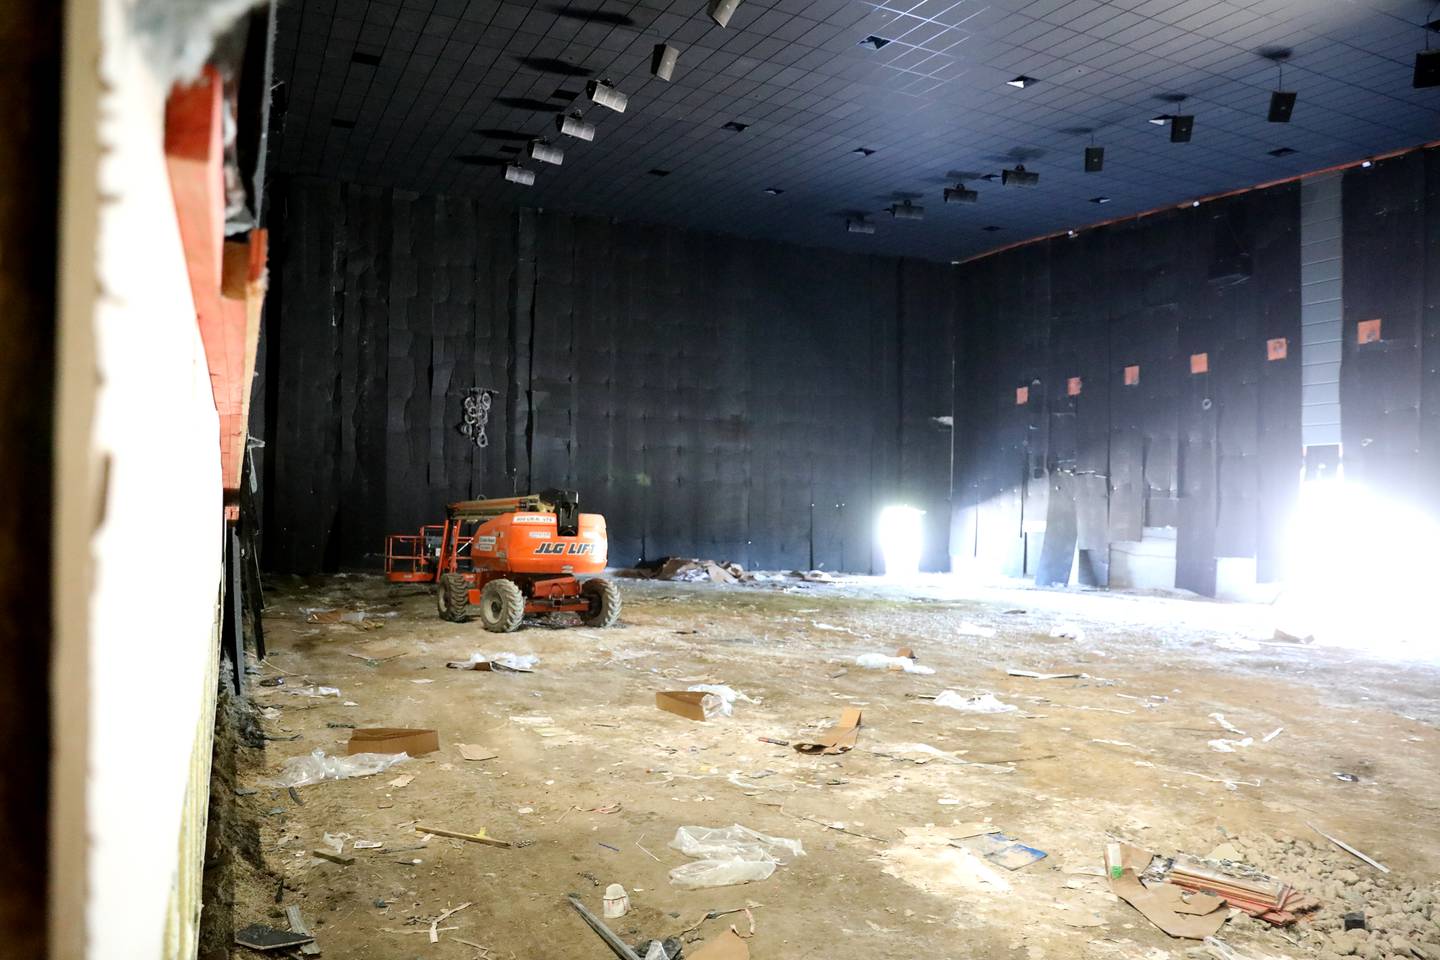 The Super EMX auditorium at the new Emagine Batavia movie theater is designed to be the largest Cinemascope® screen in Illinois. The theater will open to the public on June 1, 2023.